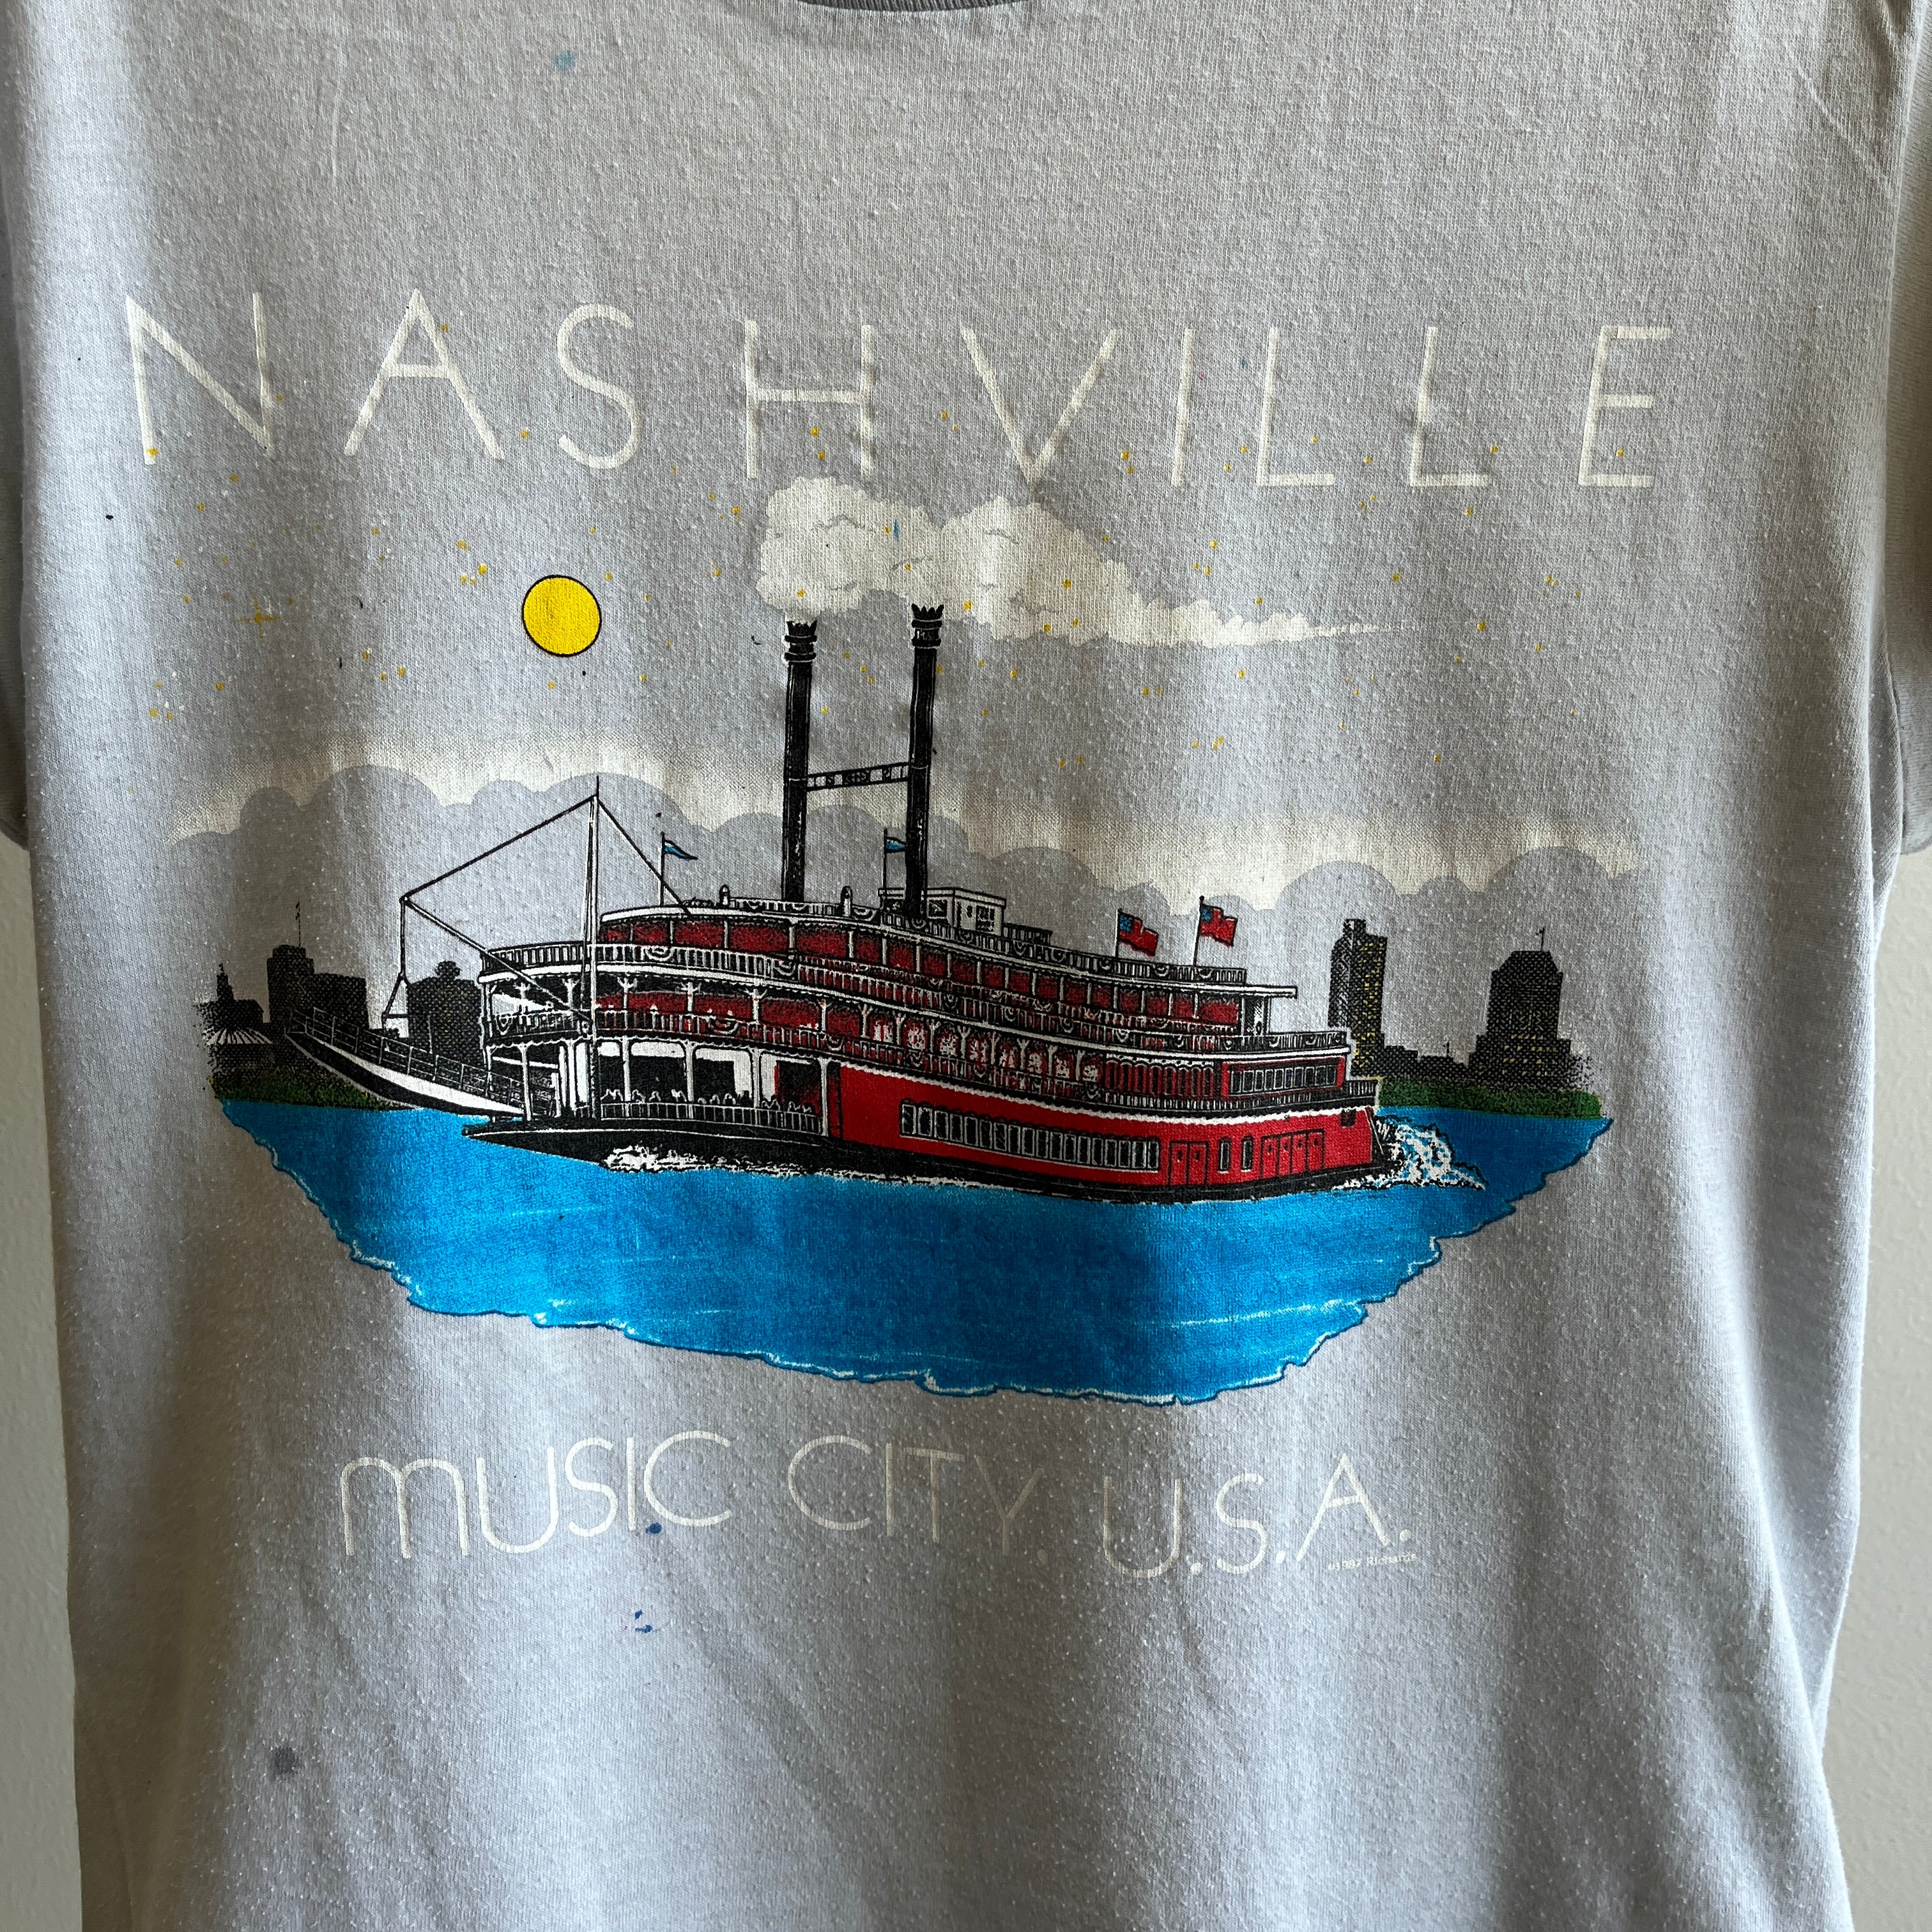 1987 Nashville Music City, USA Super Stained Smaller Sized